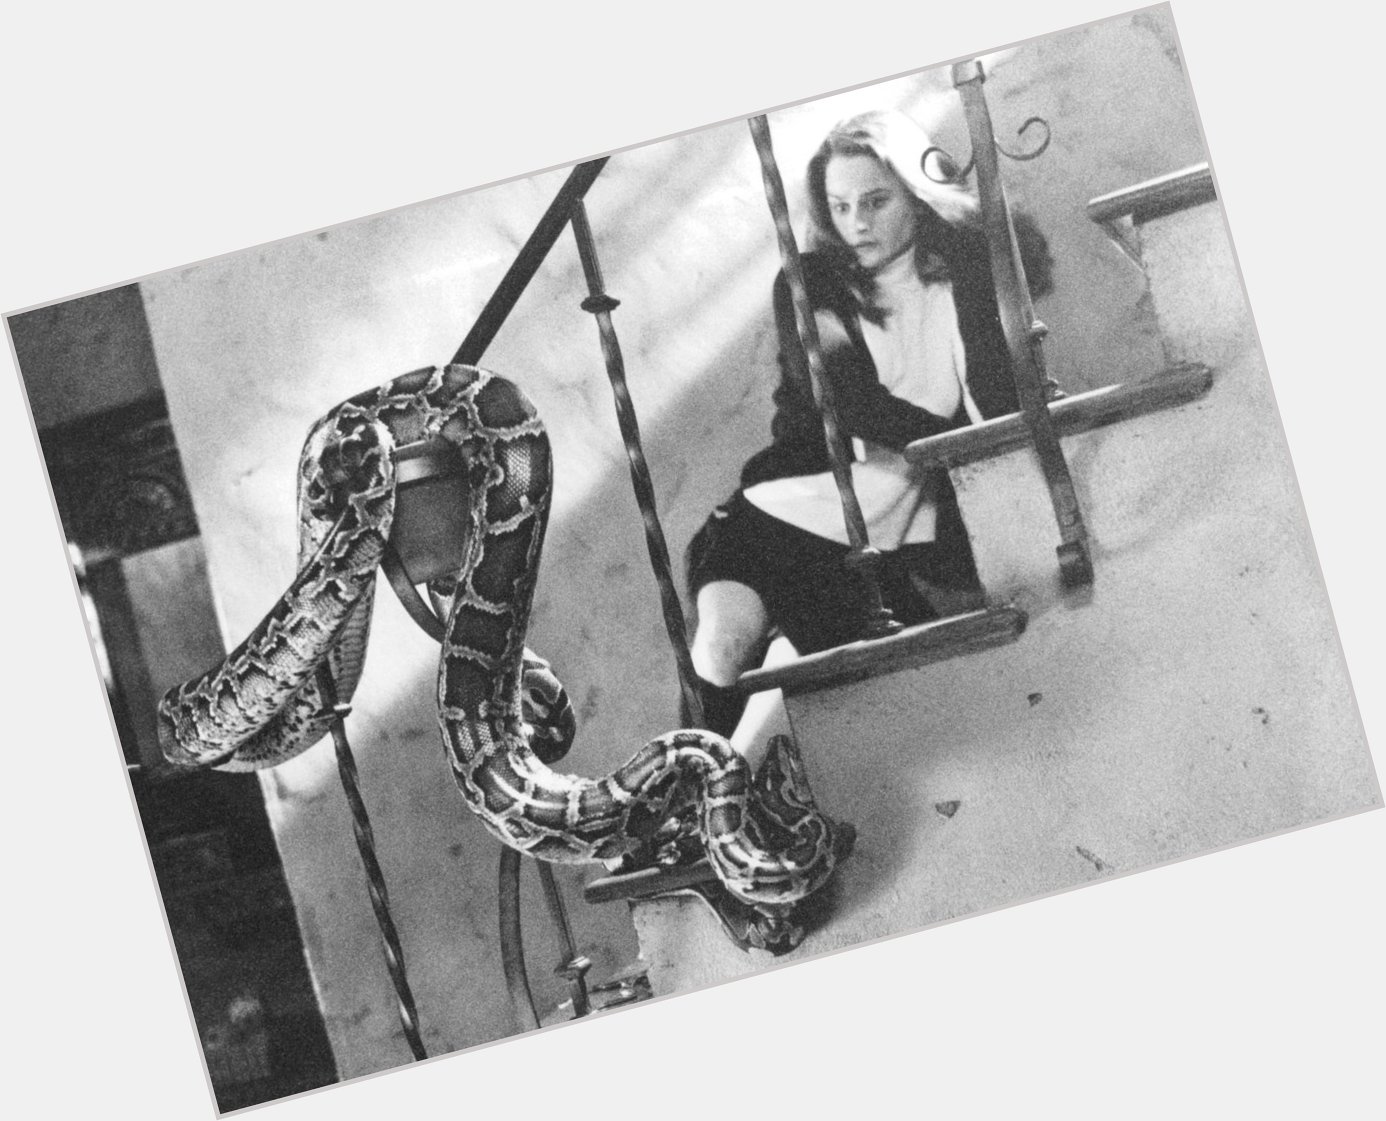 Happy birthday to Robin Tunney, featured here behind snake. 